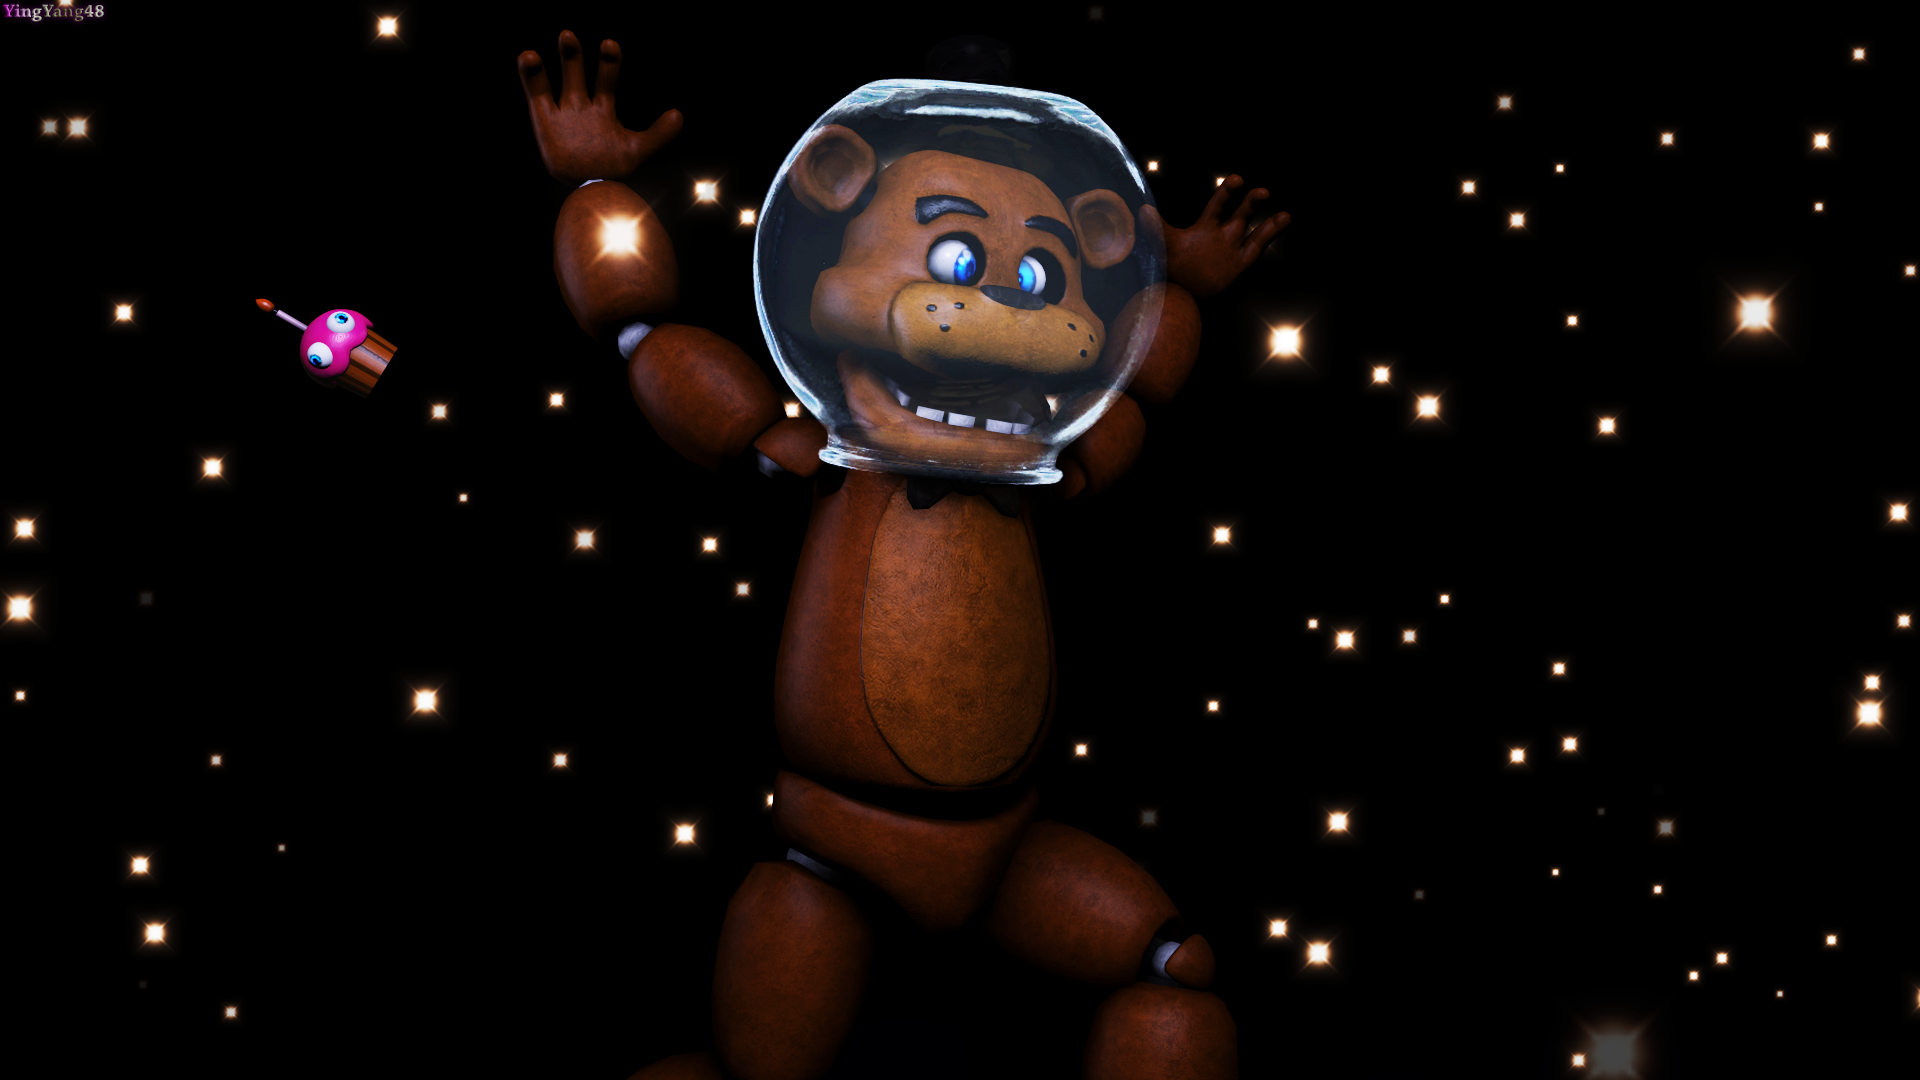 Video Game Five Nights At Freddy 039 S 1920x1080